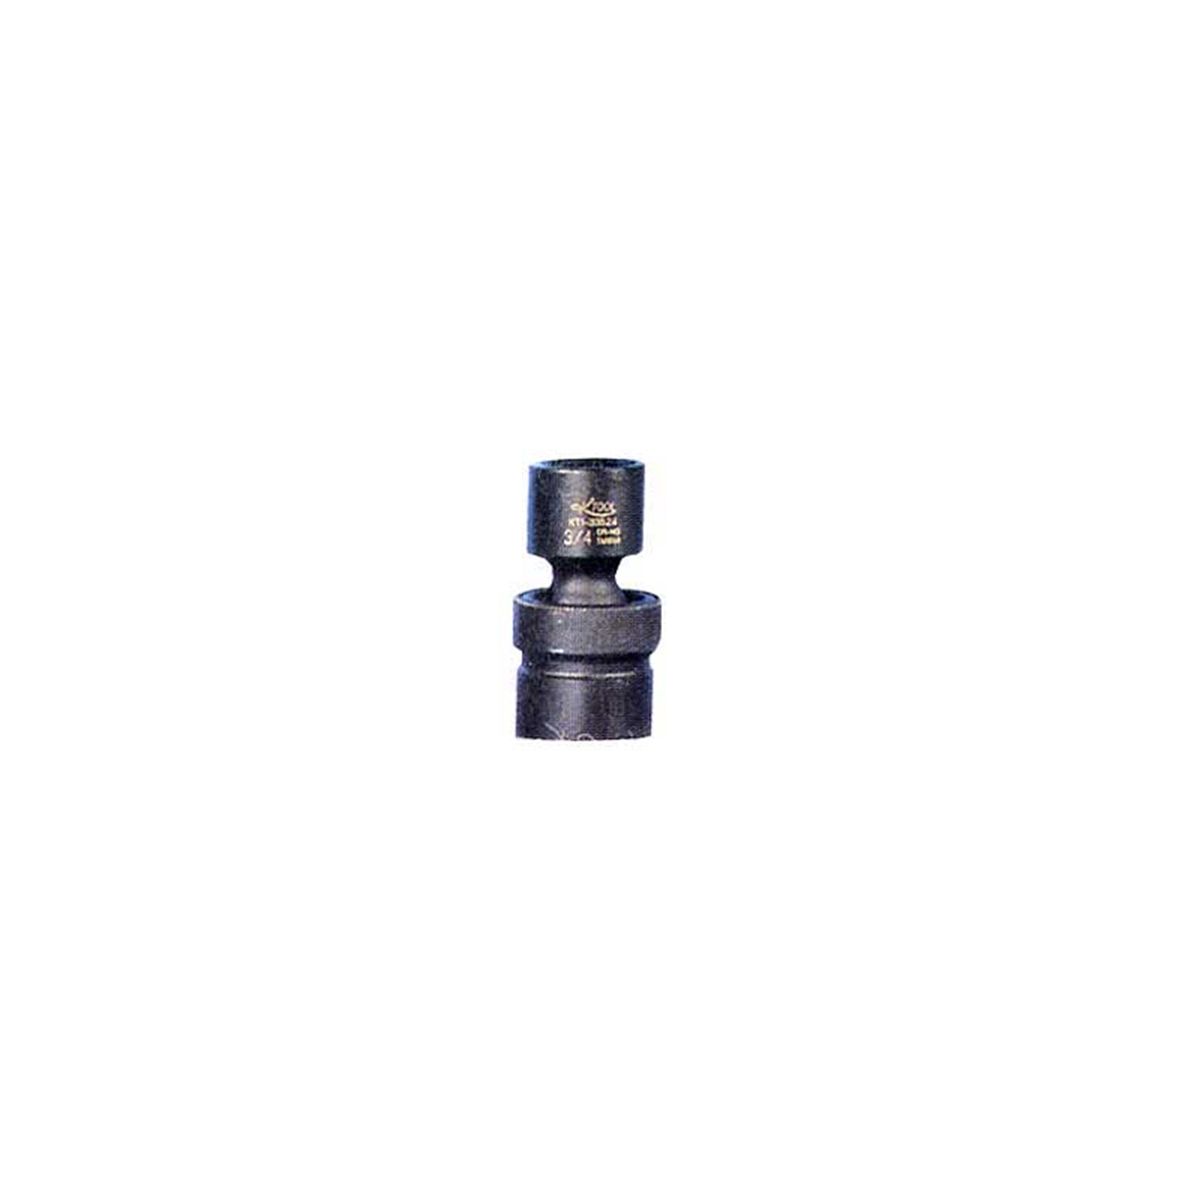 Shallow Flex Impact Socket - 3/8 In Dr 6 Pt - 11/16 In